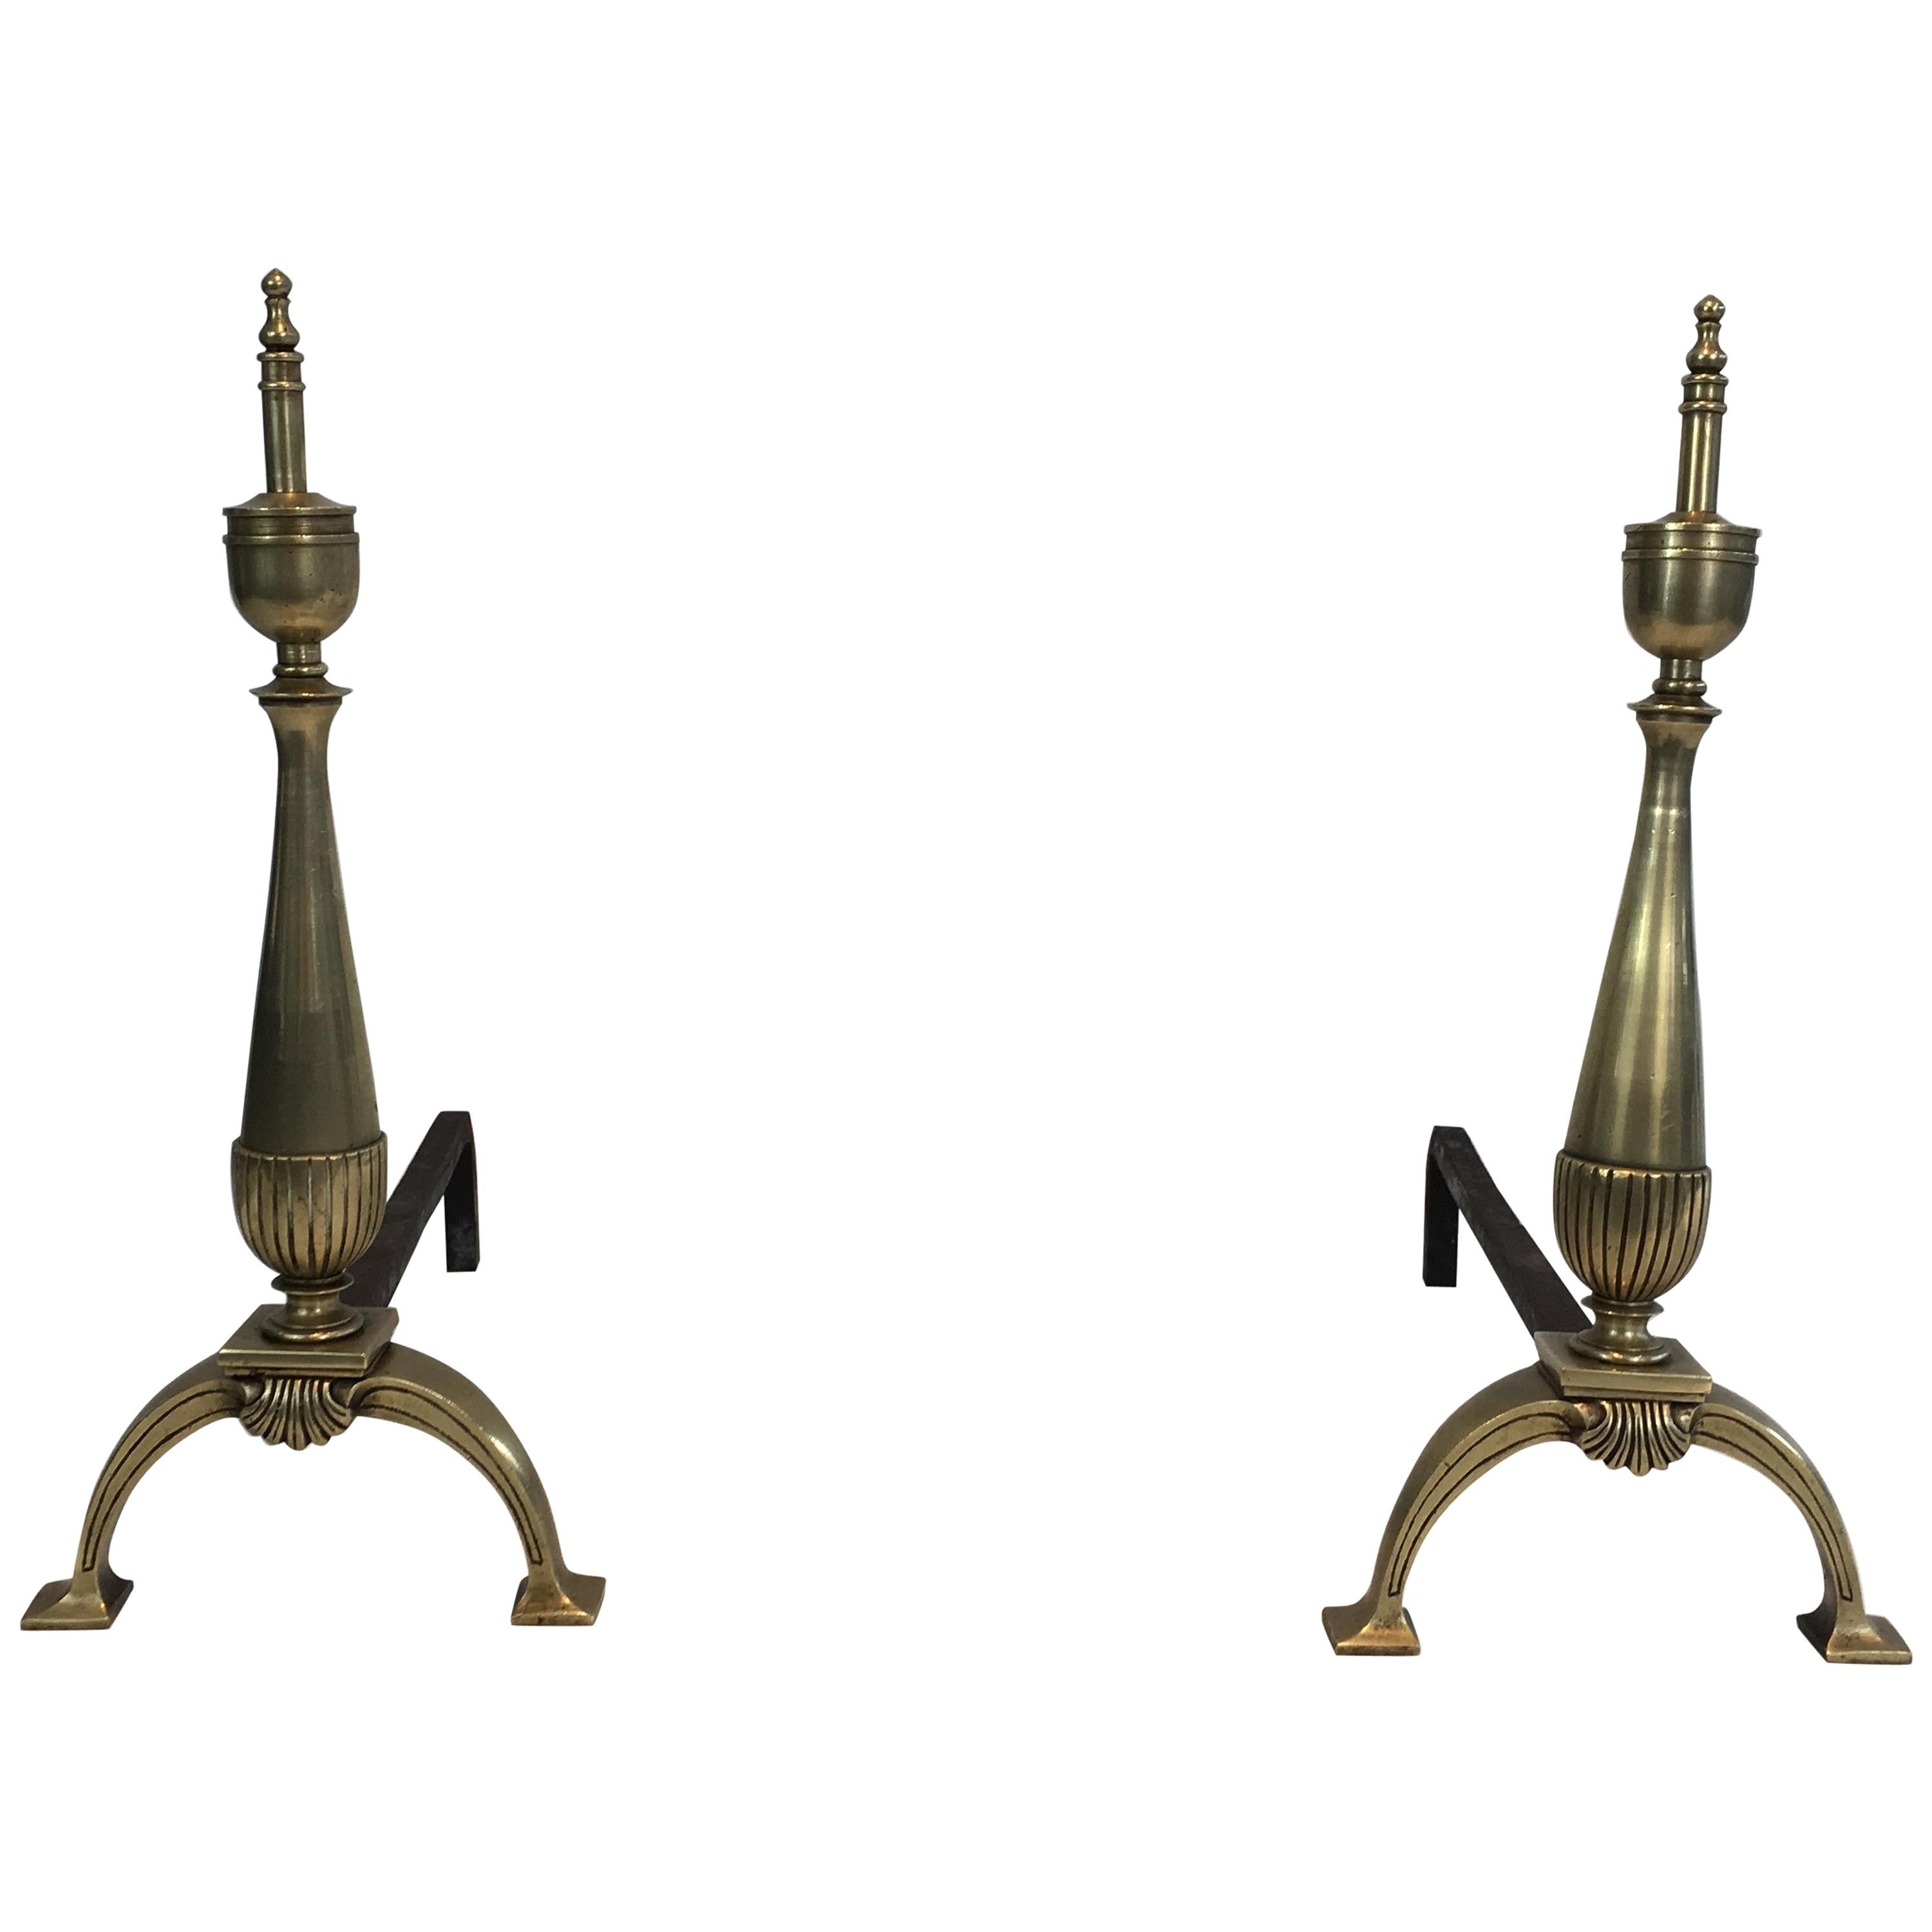 Pair of Neoclassical Brass and Wrought Iron Andirons, French, circa 1940 For Sale